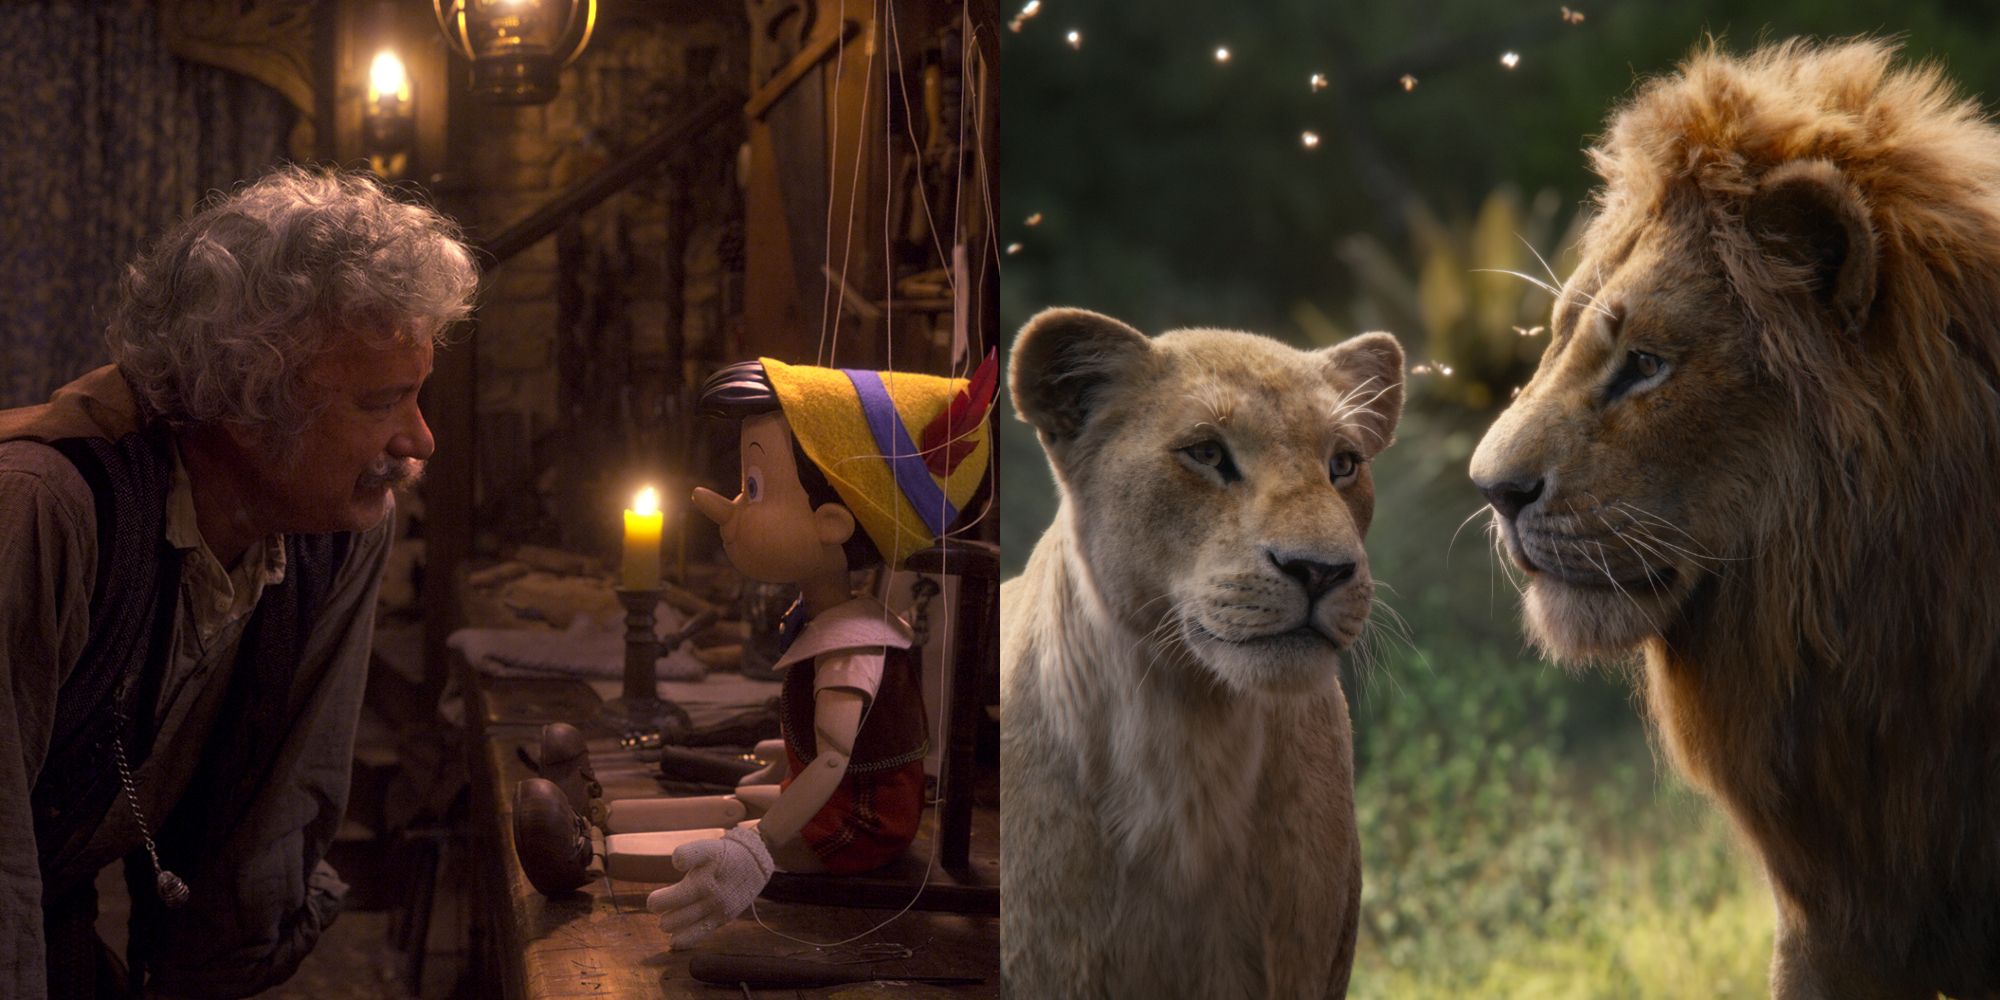 Split image showing characters from 2022's Pinnochio and 2019's The Lion King.